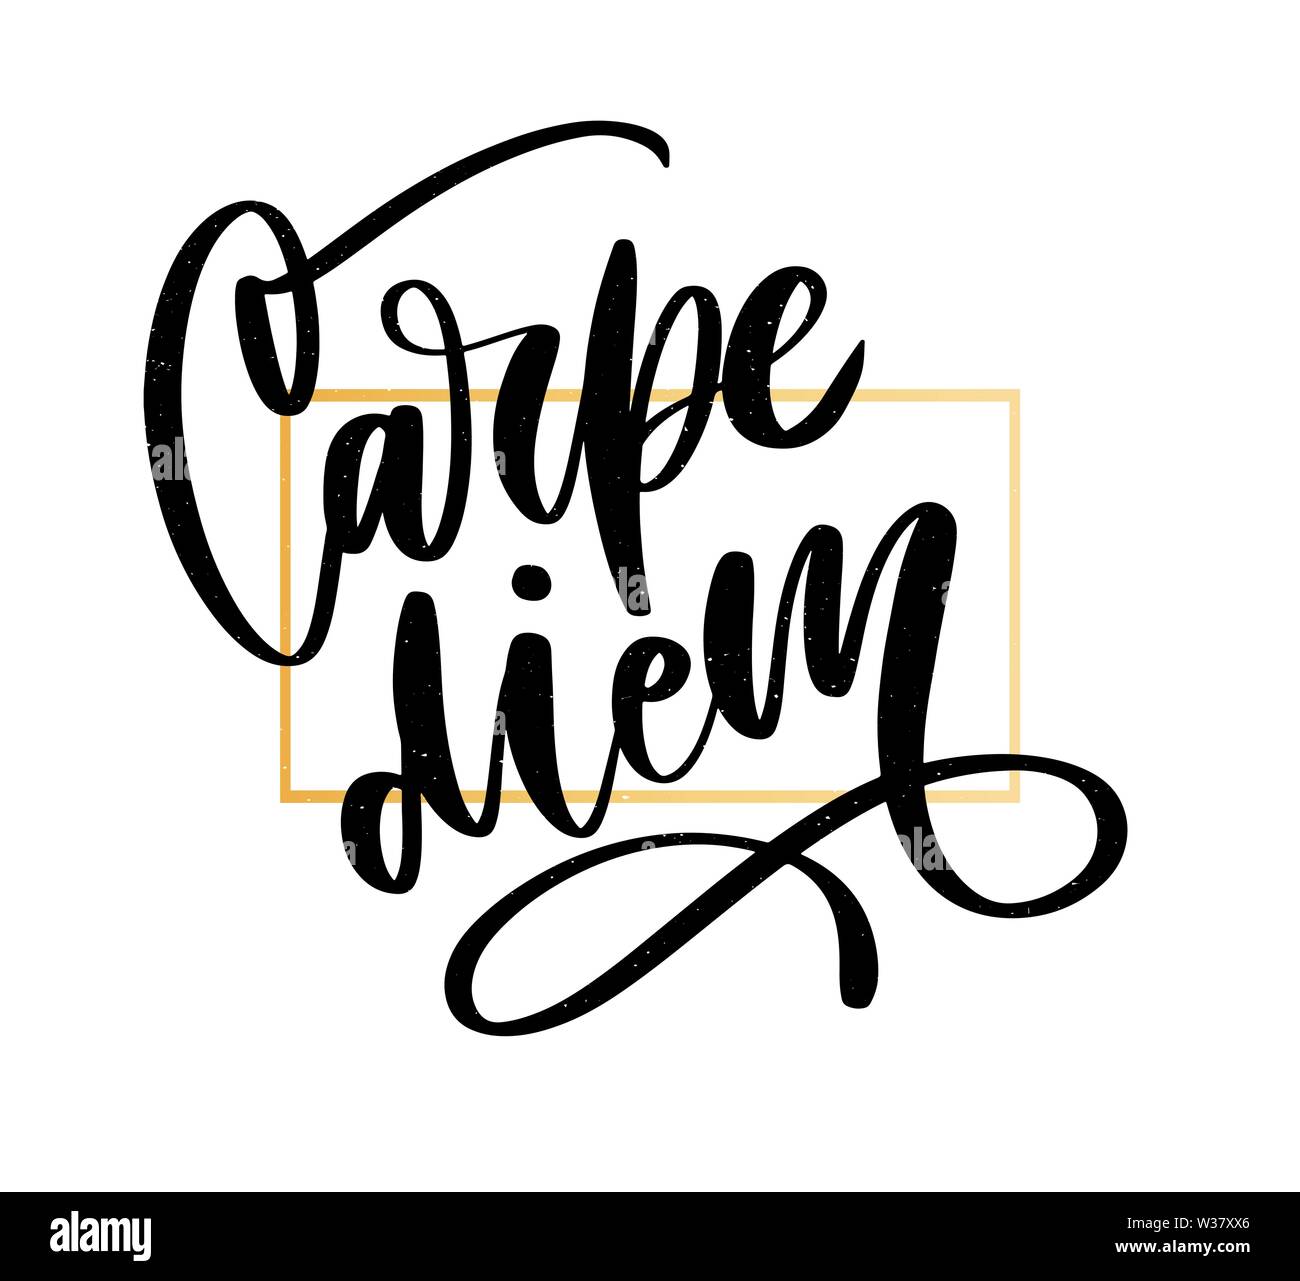 Carpe diem tattoo Cut Out Stock Images & Pictures - Alamy